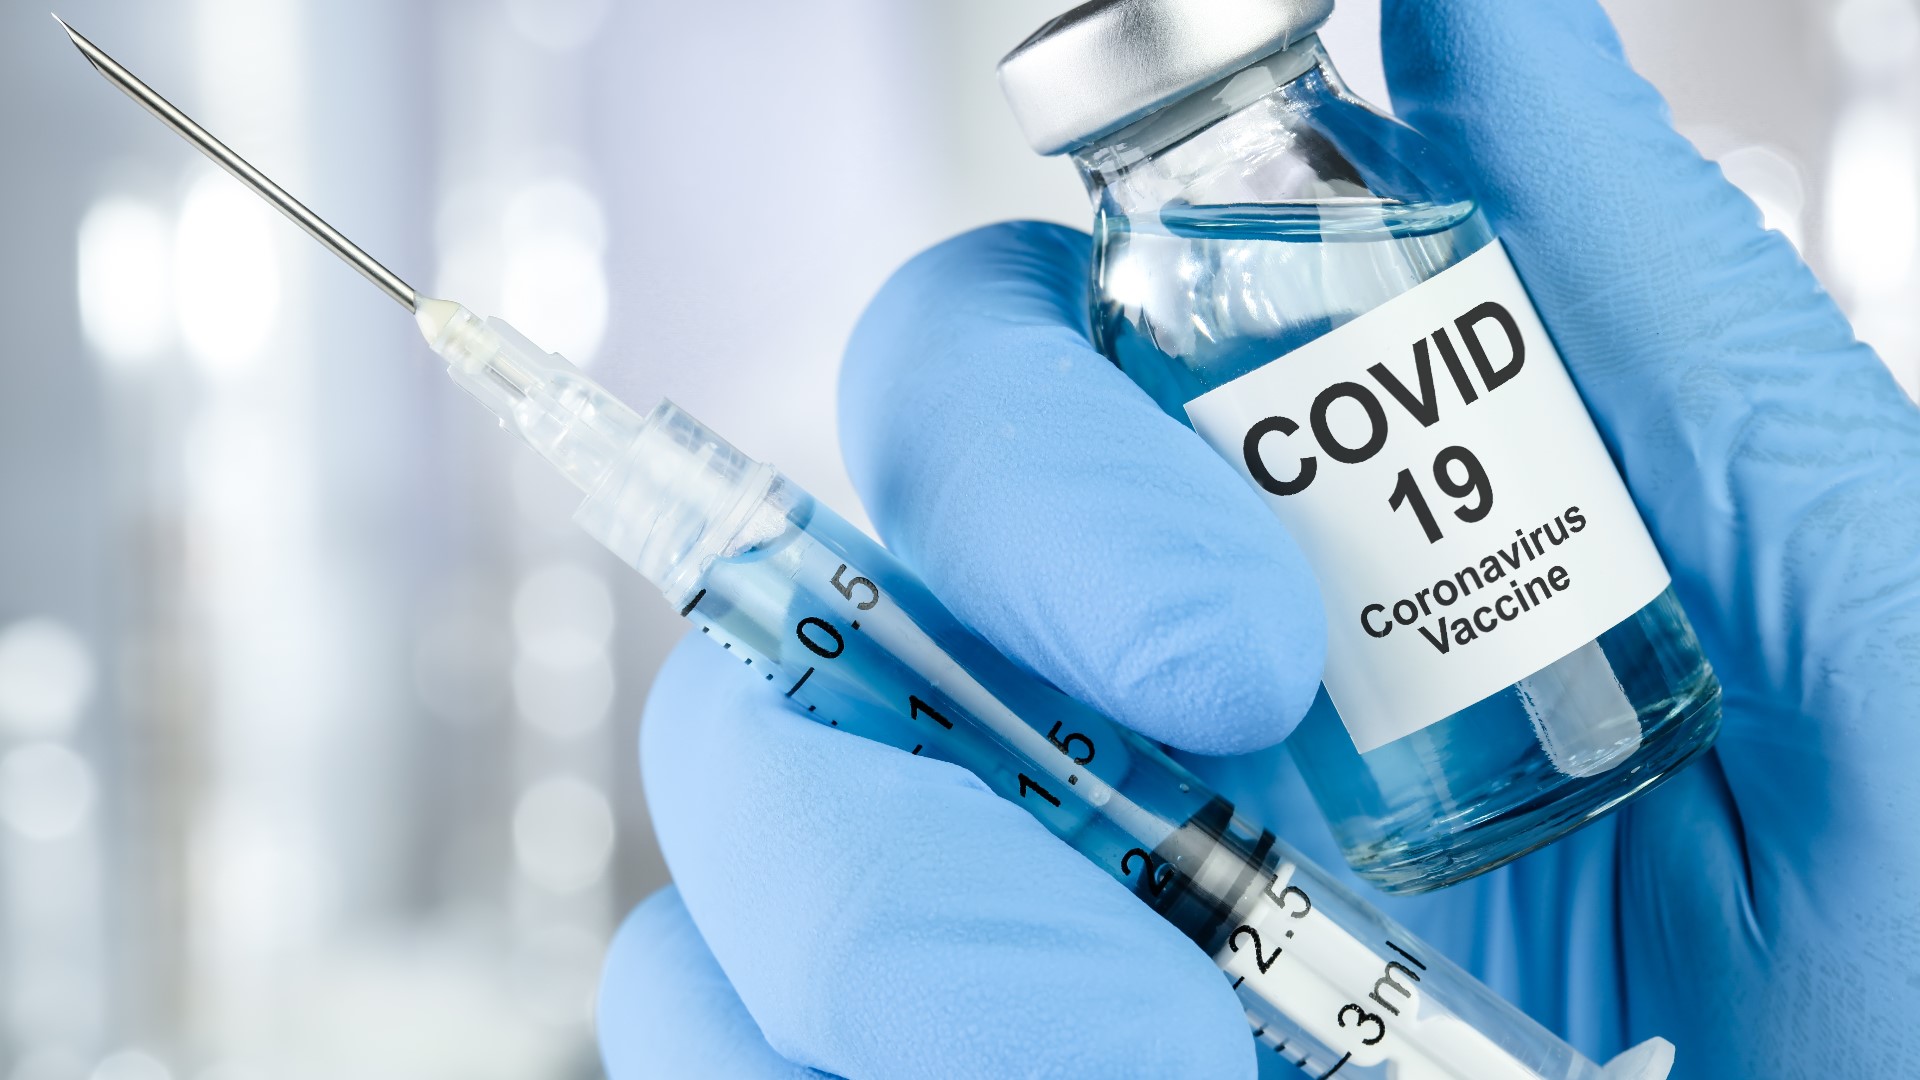 Starting Monday, proof of COVID-19 vaccination will no longer be required.